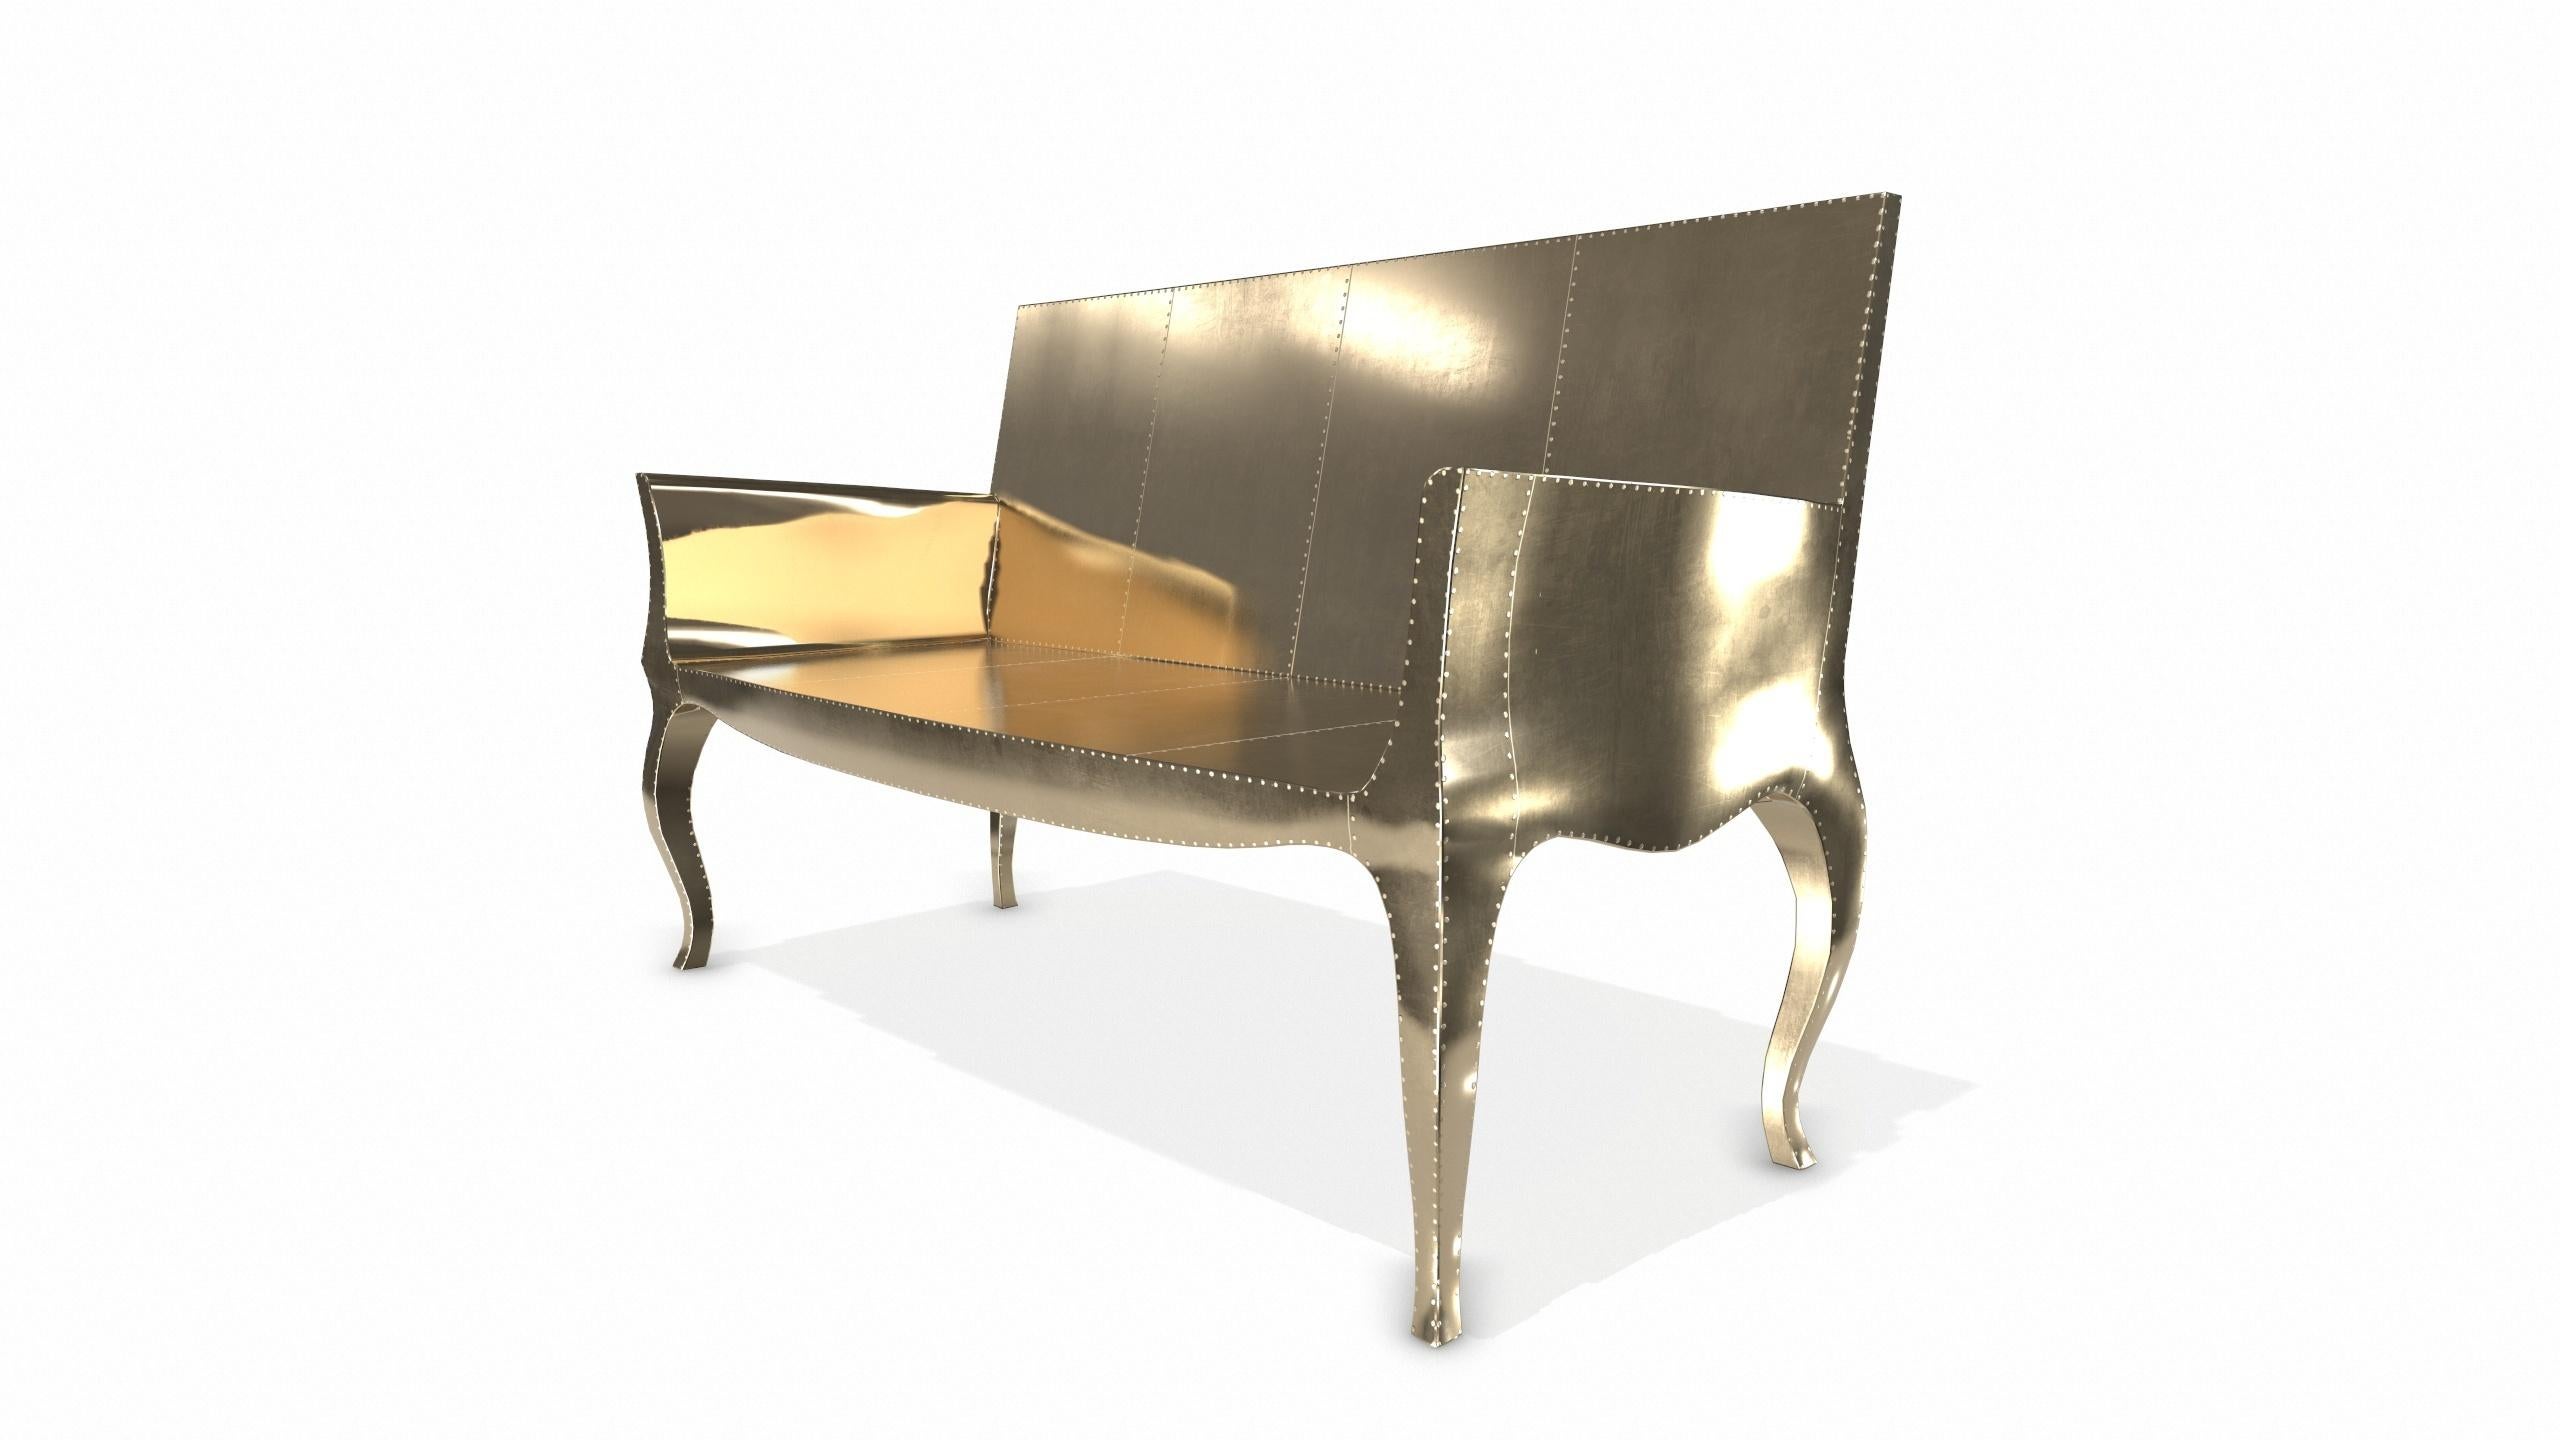 Hand-Crafted Louise Settee Art Deco Settees in Smooth Brass by Paul Mathieu for S Odegard For Sale